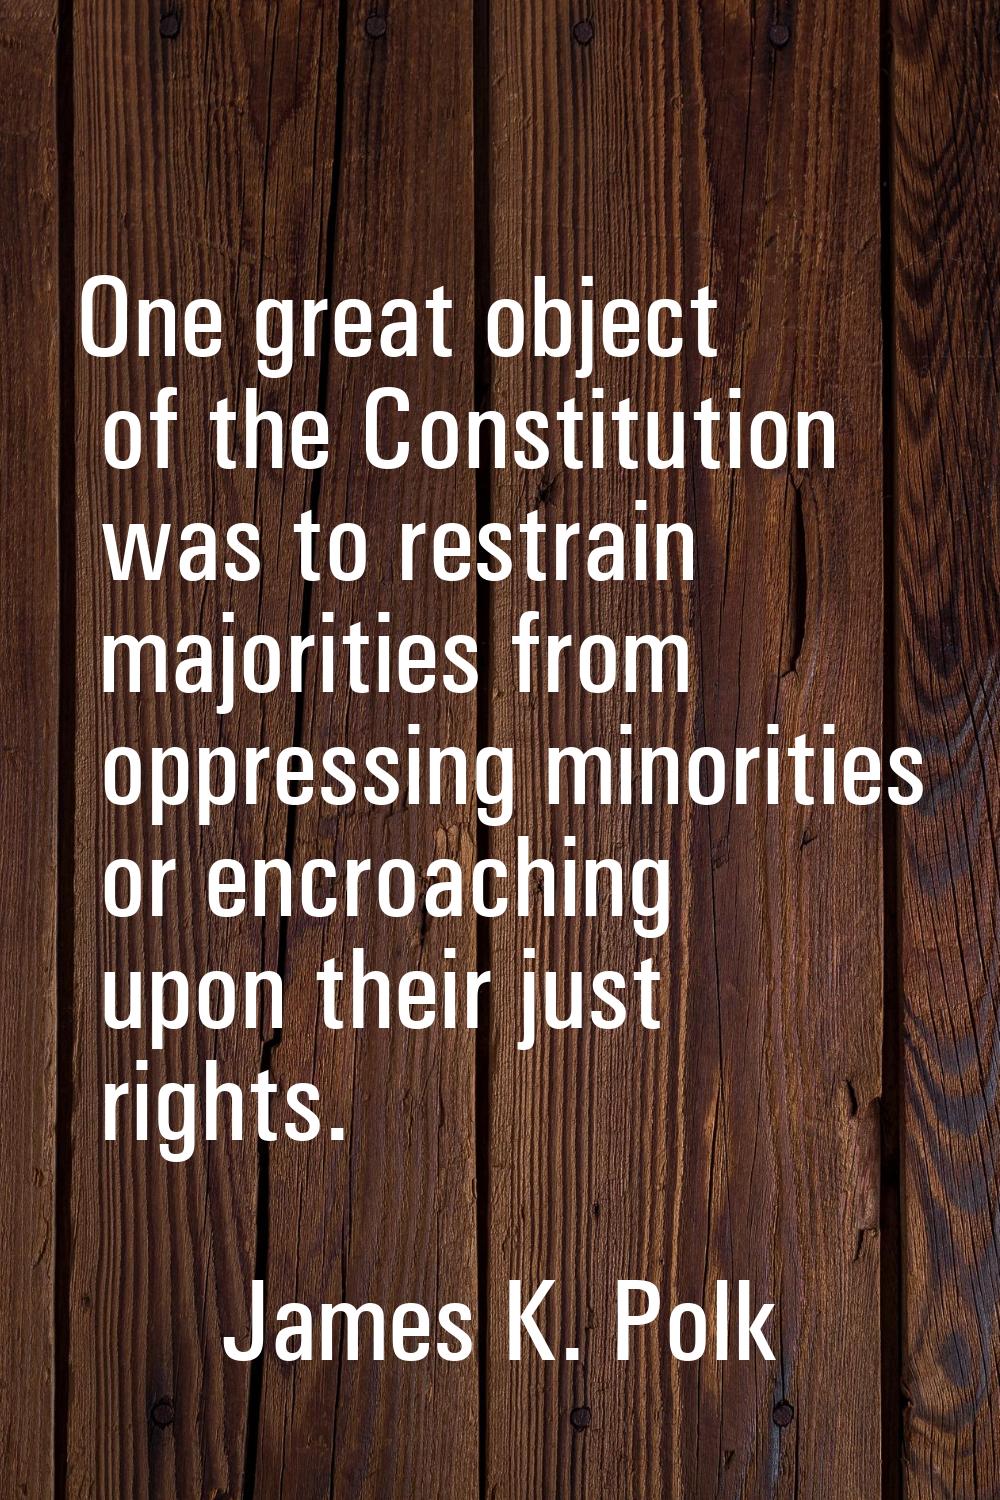 One great object of the Constitution was to restrain majorities from oppressing minorities or encro